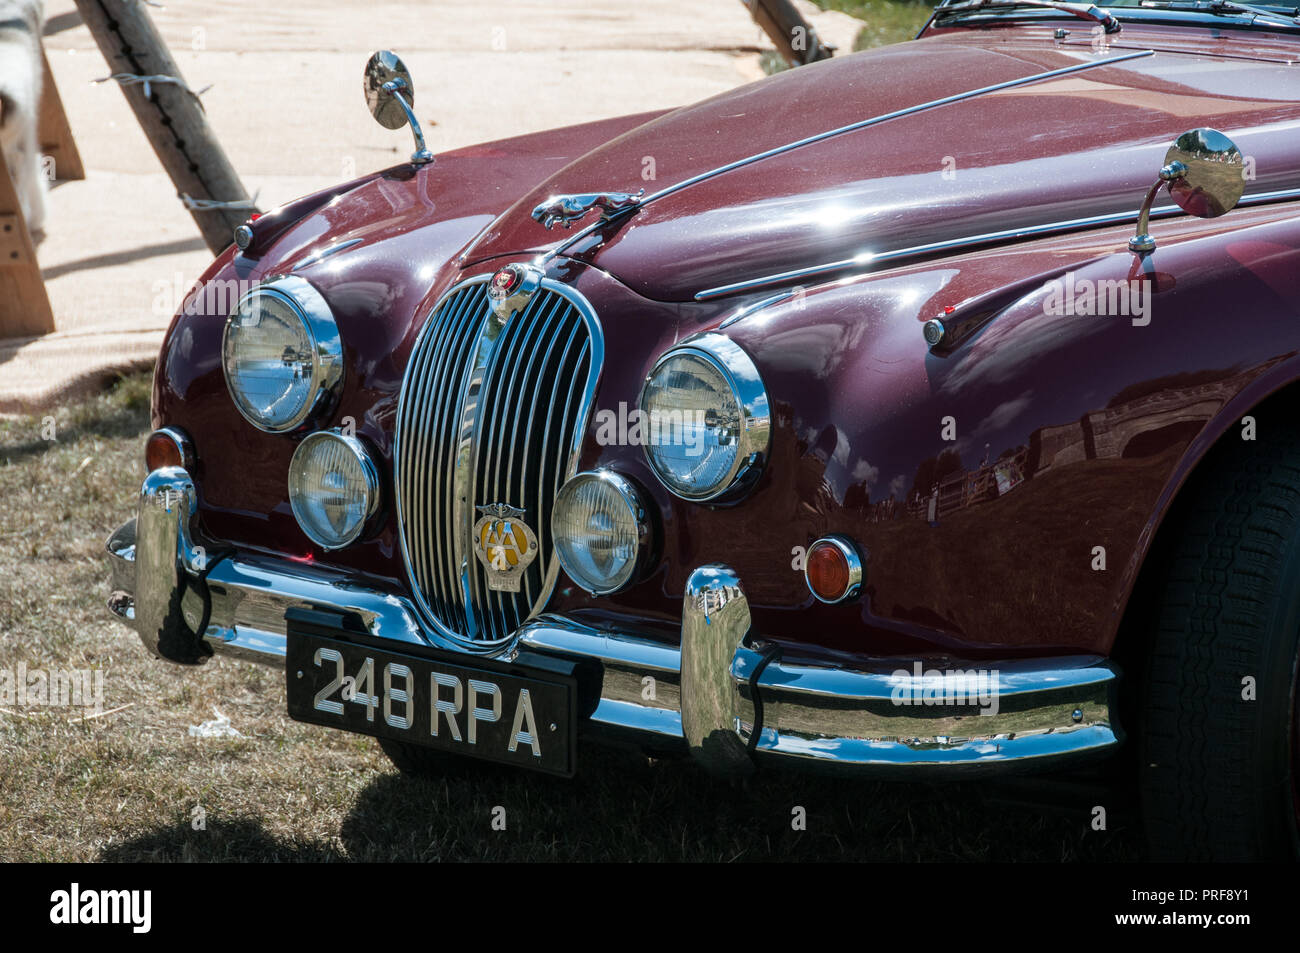 Around the UK - Countryfile Live -The Jaguar car that was used in the TV series featuring John Thaw as Morse. Stock Photo